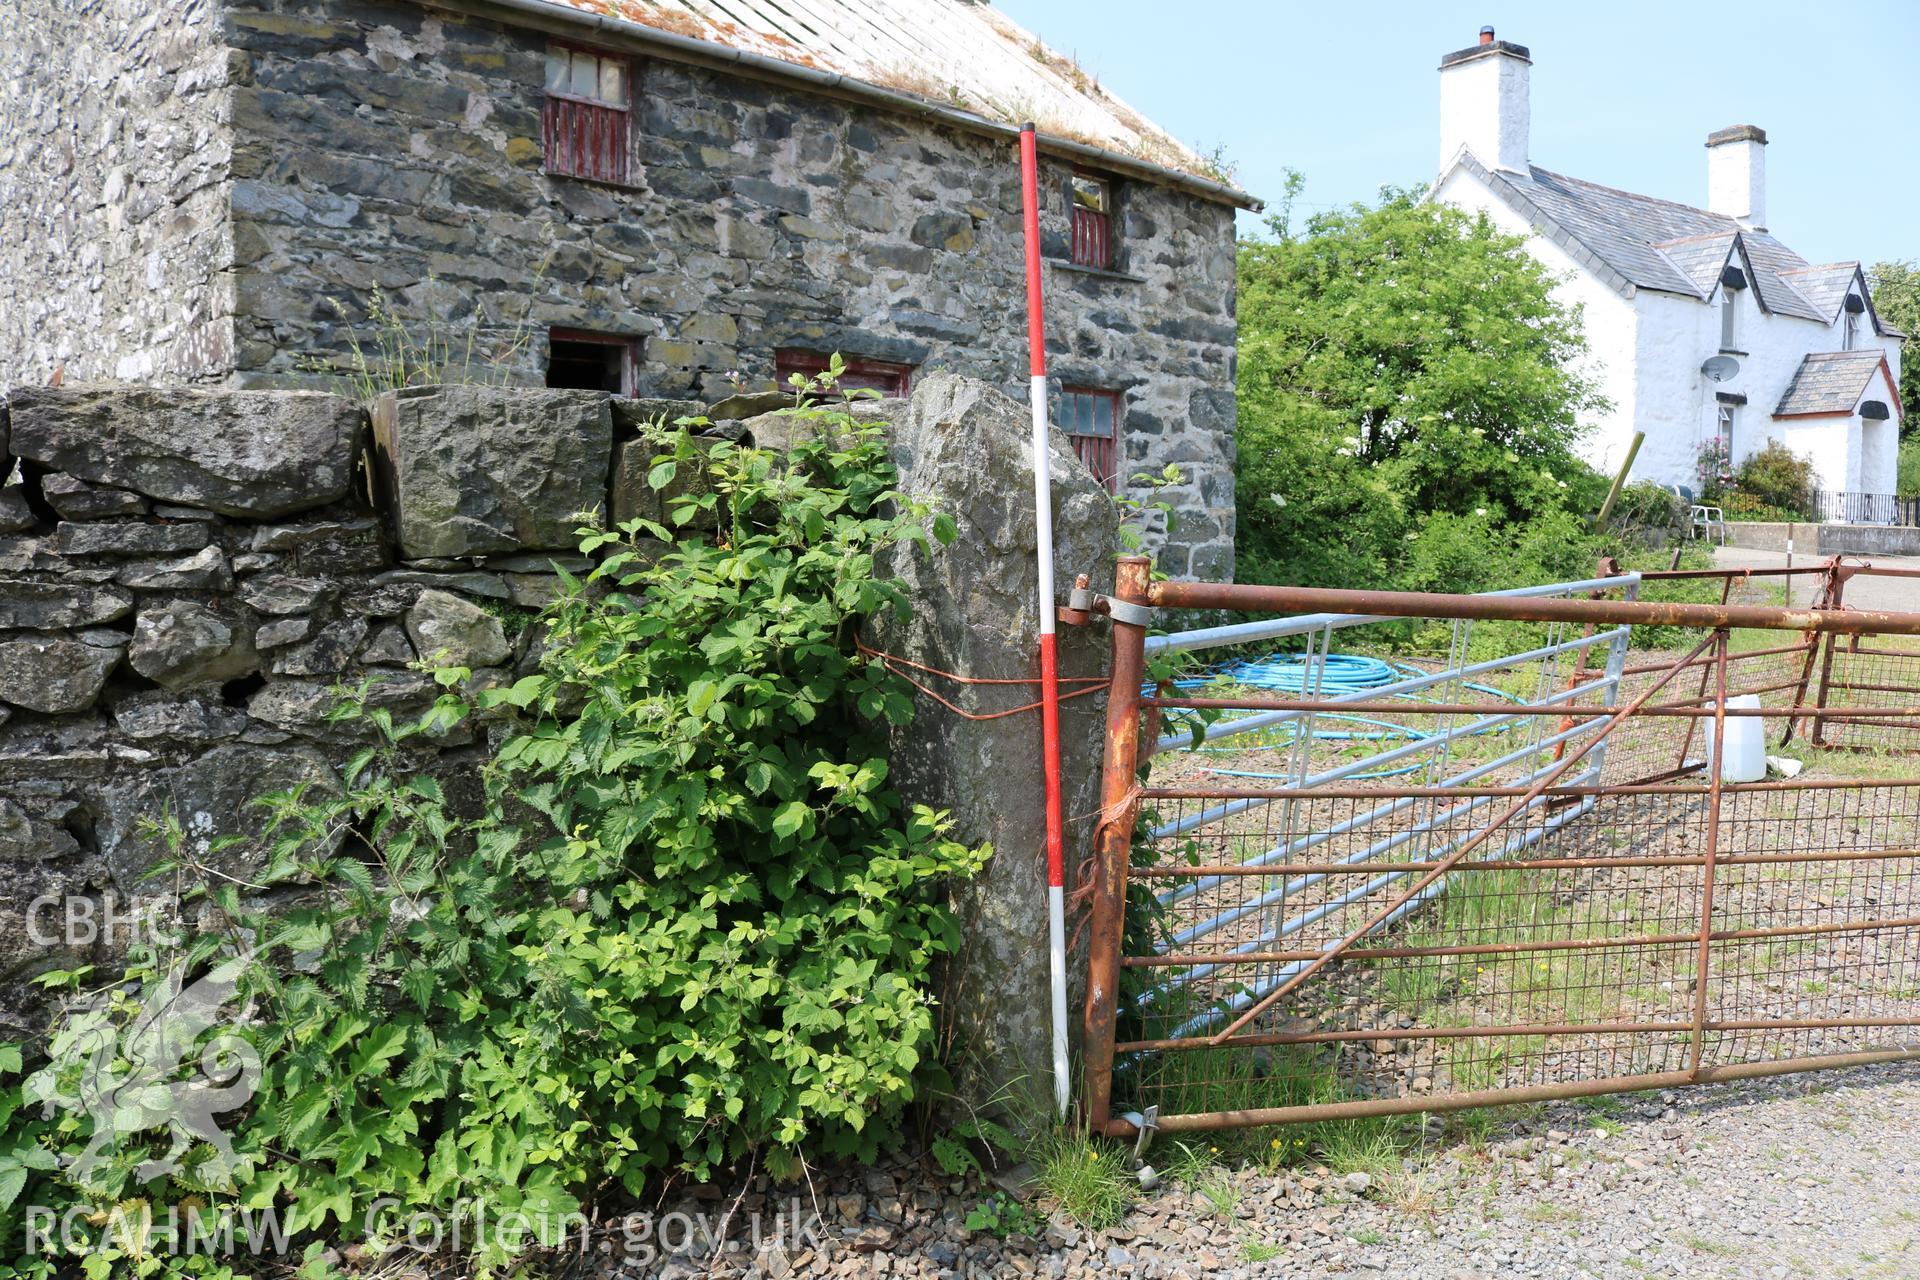 Photograph showing exterior view of 'granary', at Maes yr Hendre, taken by Dr Marian Gwyn, 6th July 2016. (Original Reference no. 0197)